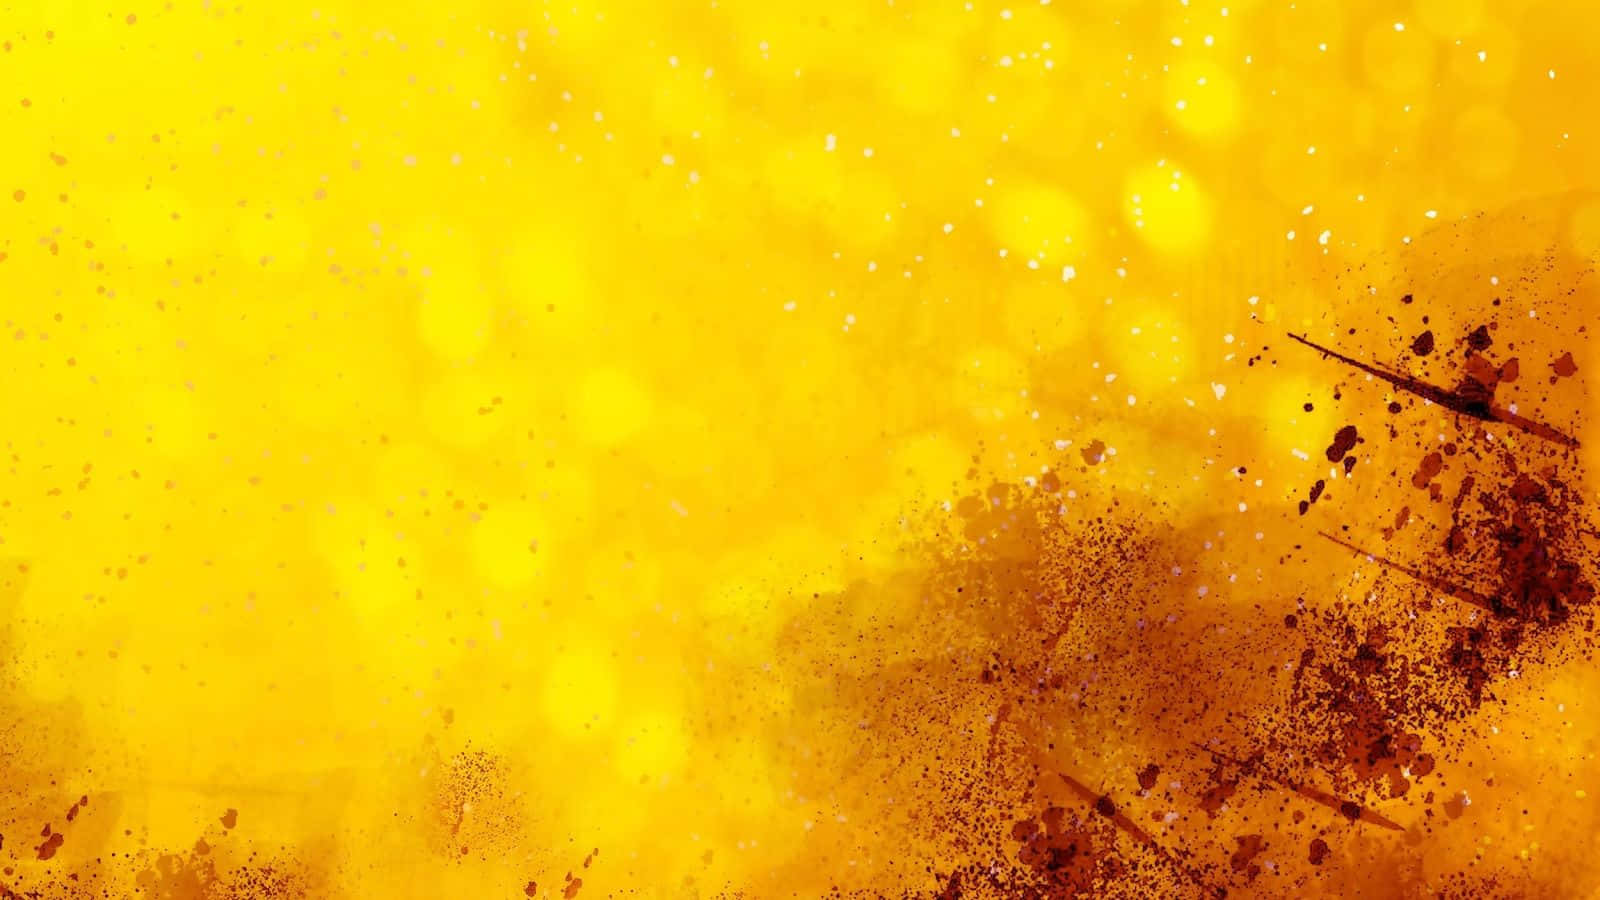 A Yellow And Black Painting Wallpaper